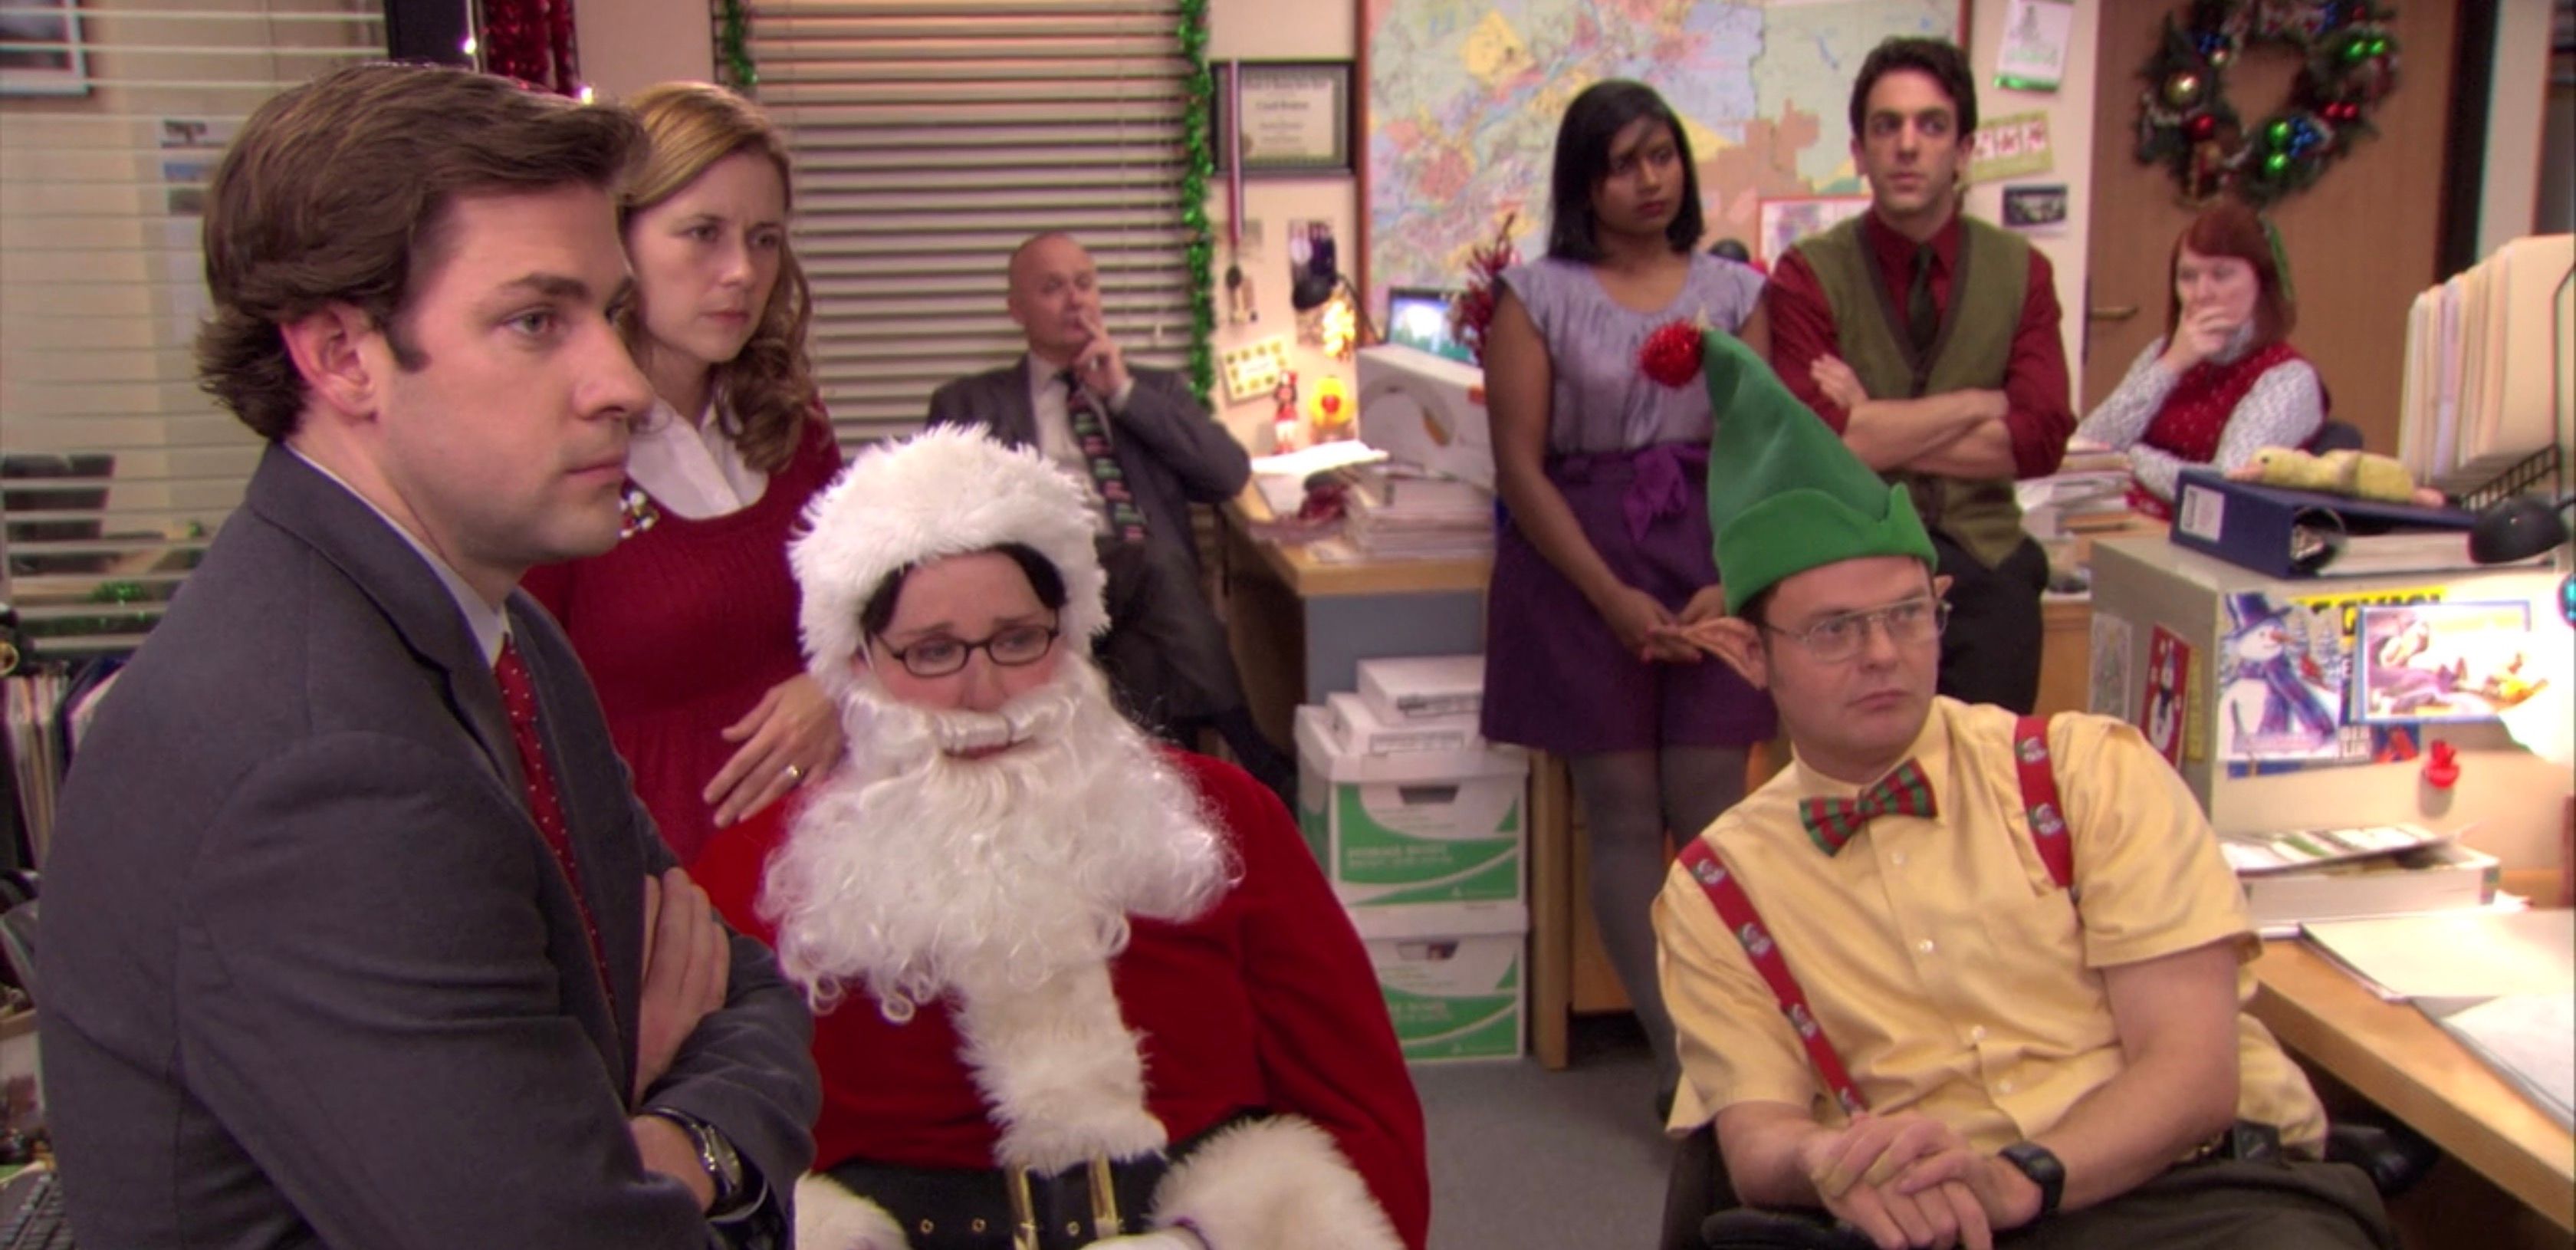 The cast of the Office dressed up in Secret Santa Christmas episode.